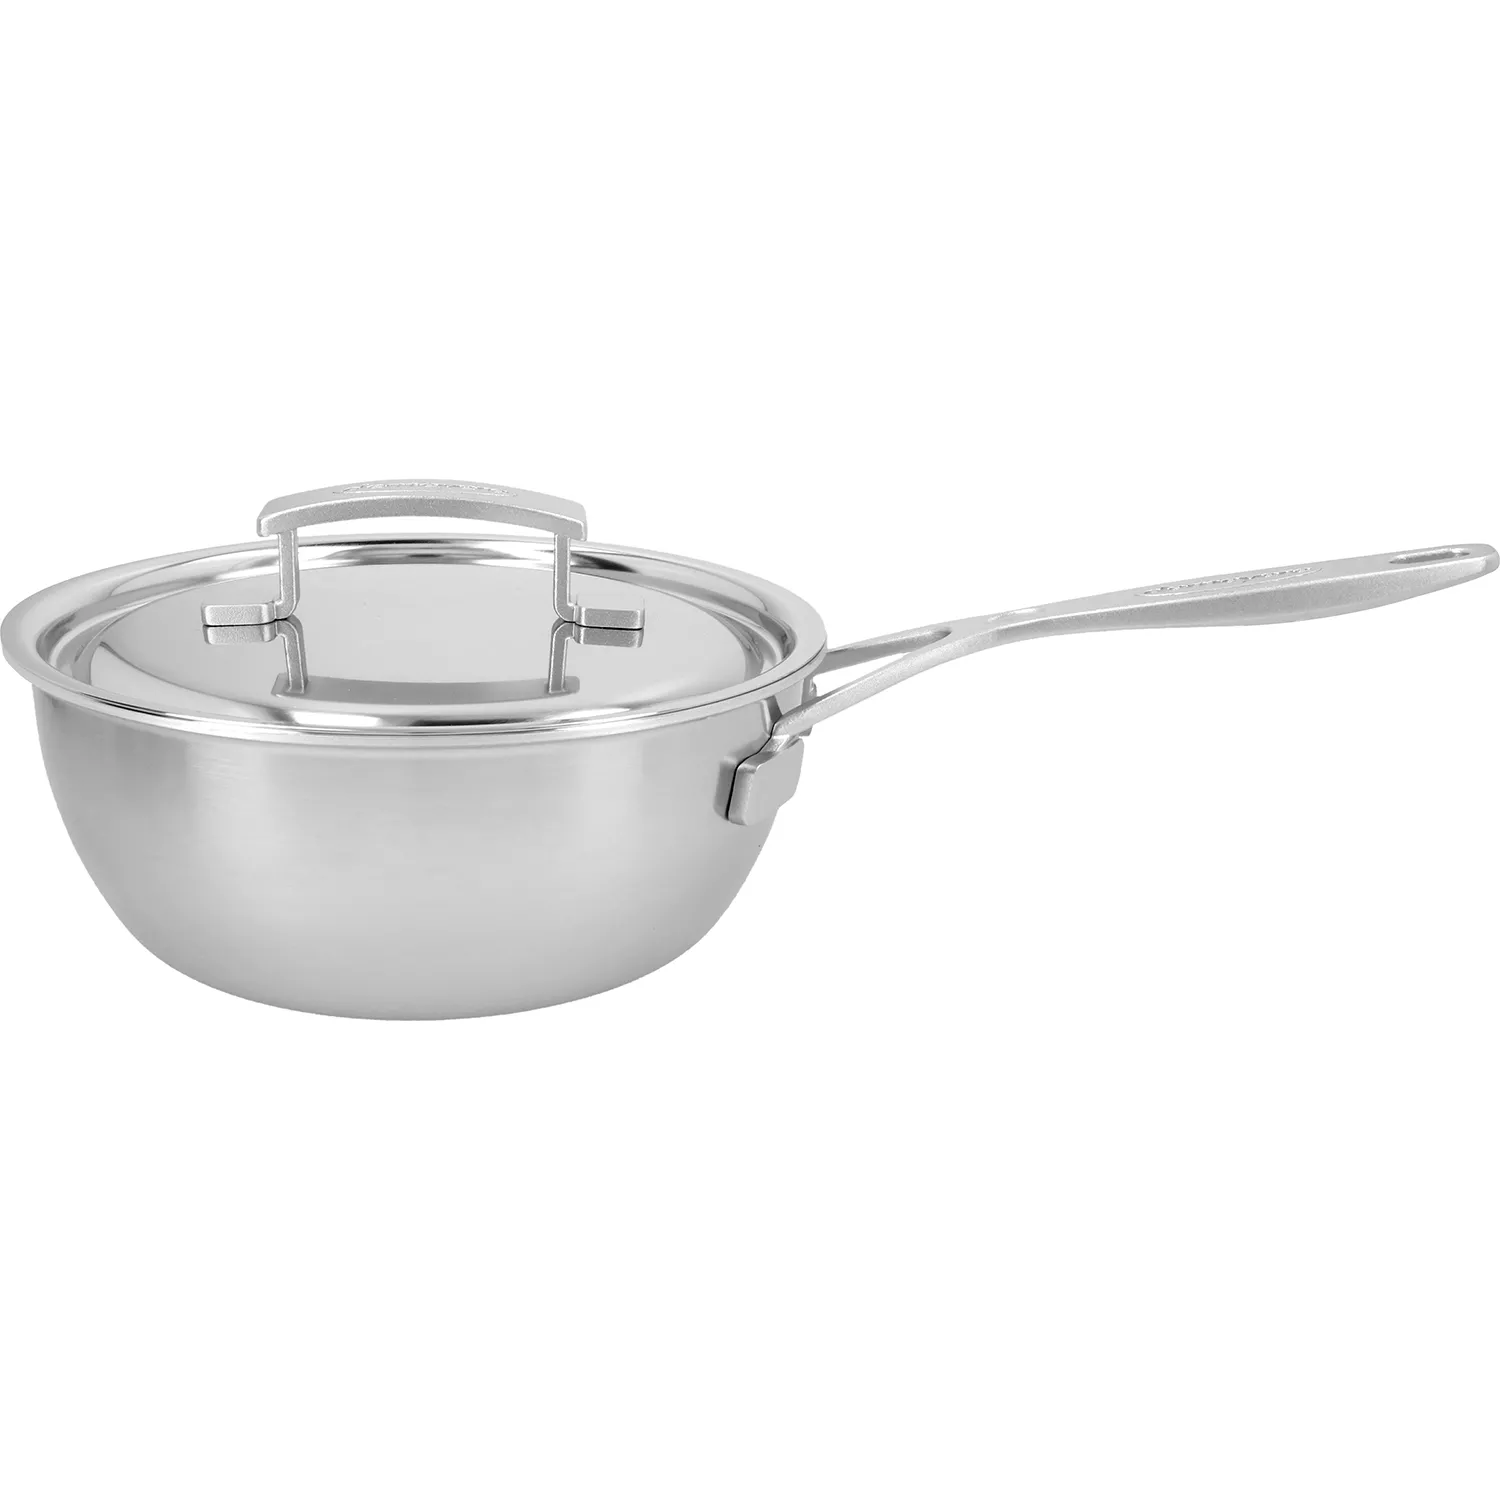 Demeyere Industry5 Stainless Steel Saucier With Lid, 2 Qt.